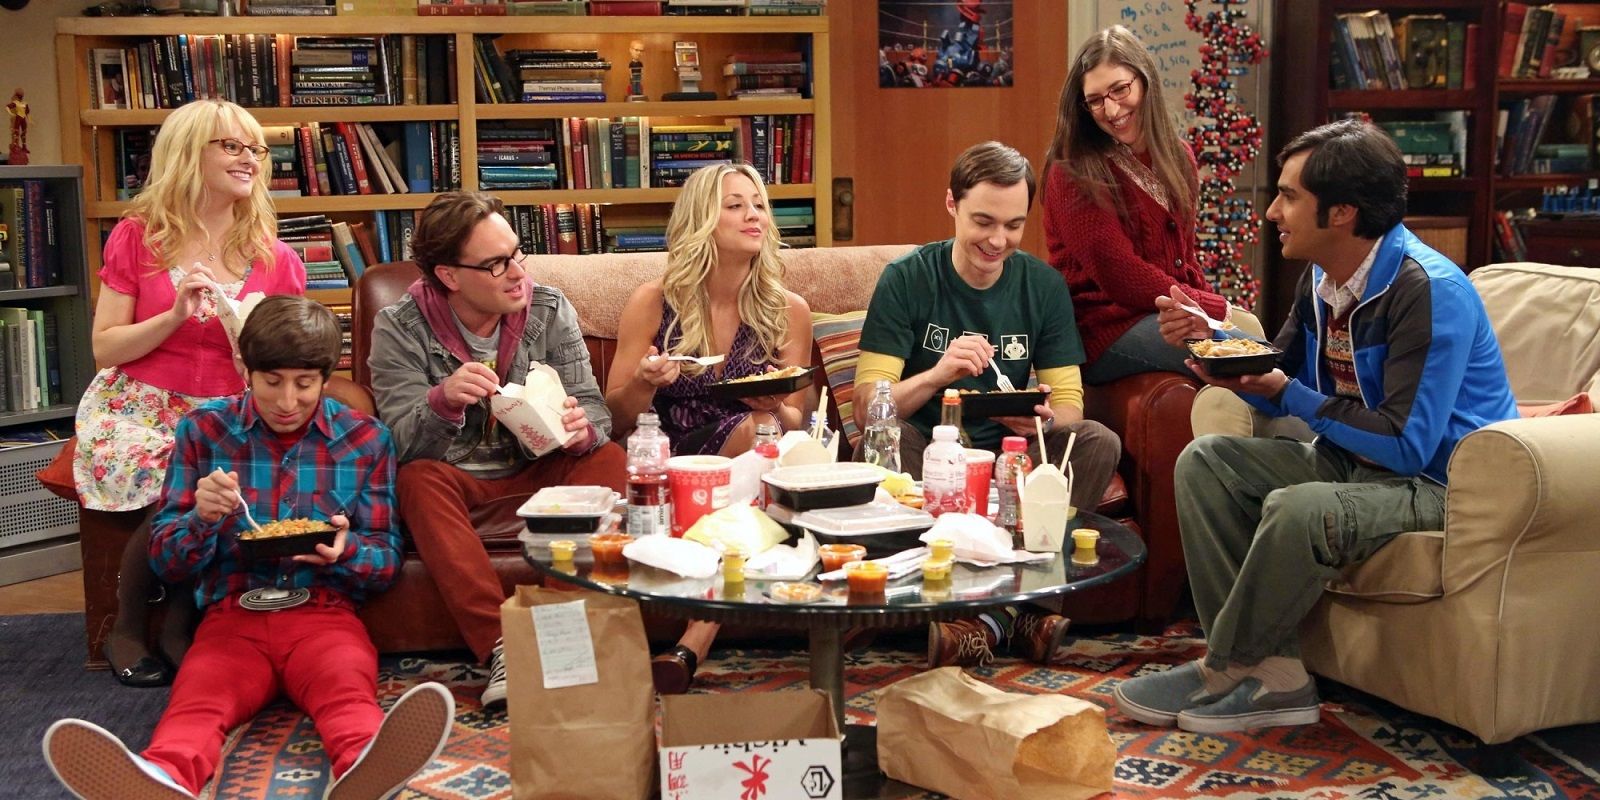 The group having dinner in the living room on The Big Bang Theory